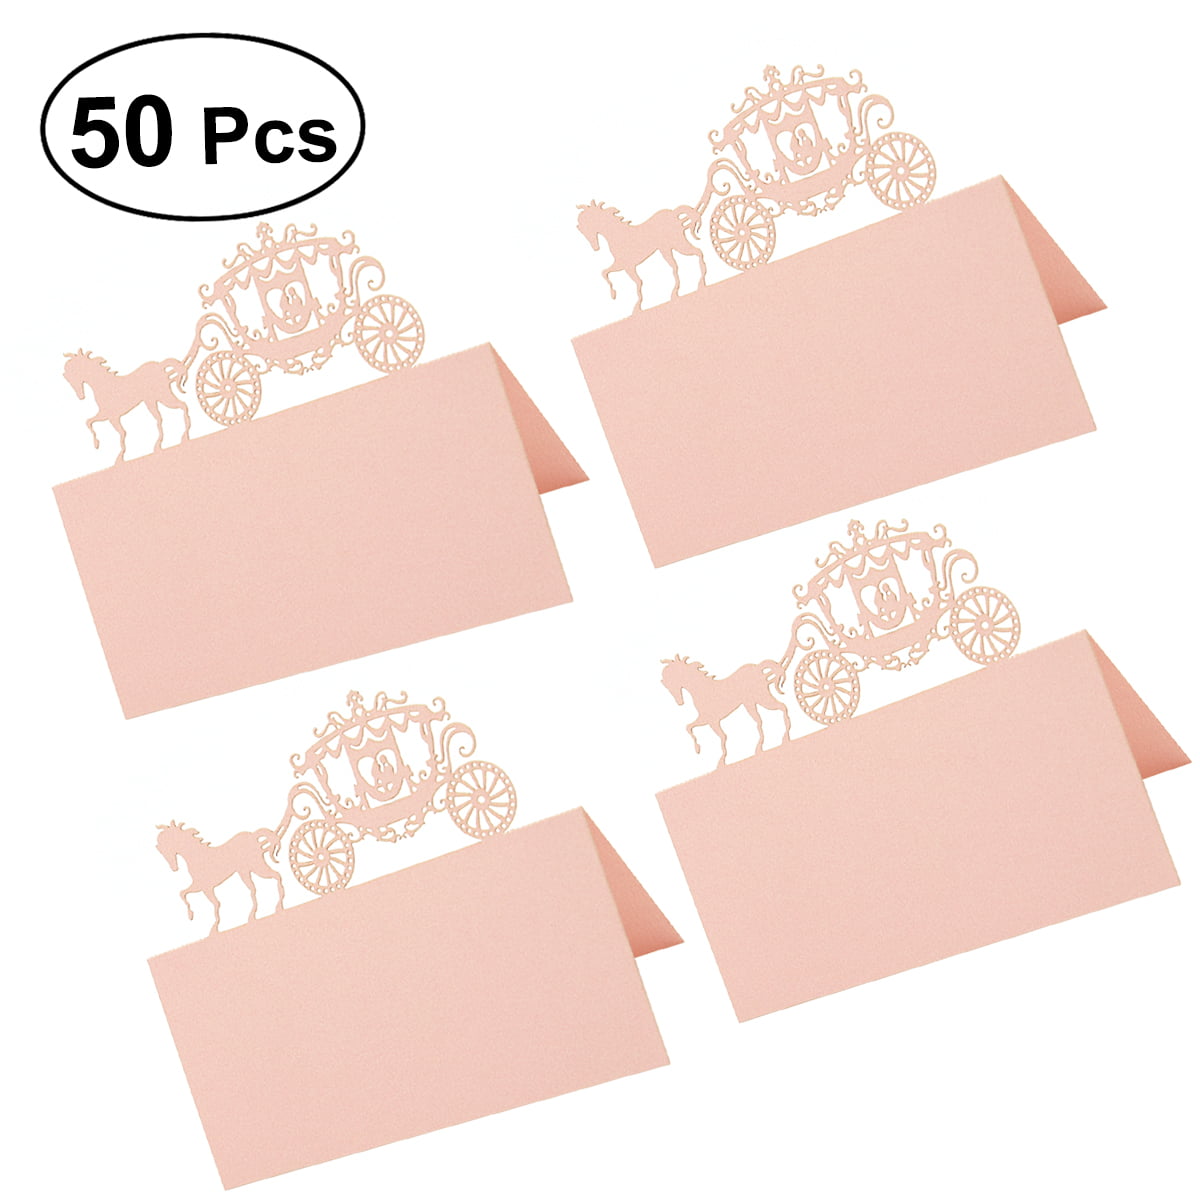 Pack of 25 Half-Fold Reception Place Card Wedding Banquet and Special Events A20 Table Place Card Birthday Bridal & Baby Shower Perfect for Christmas Party Christmas Themed Tent Style Cards